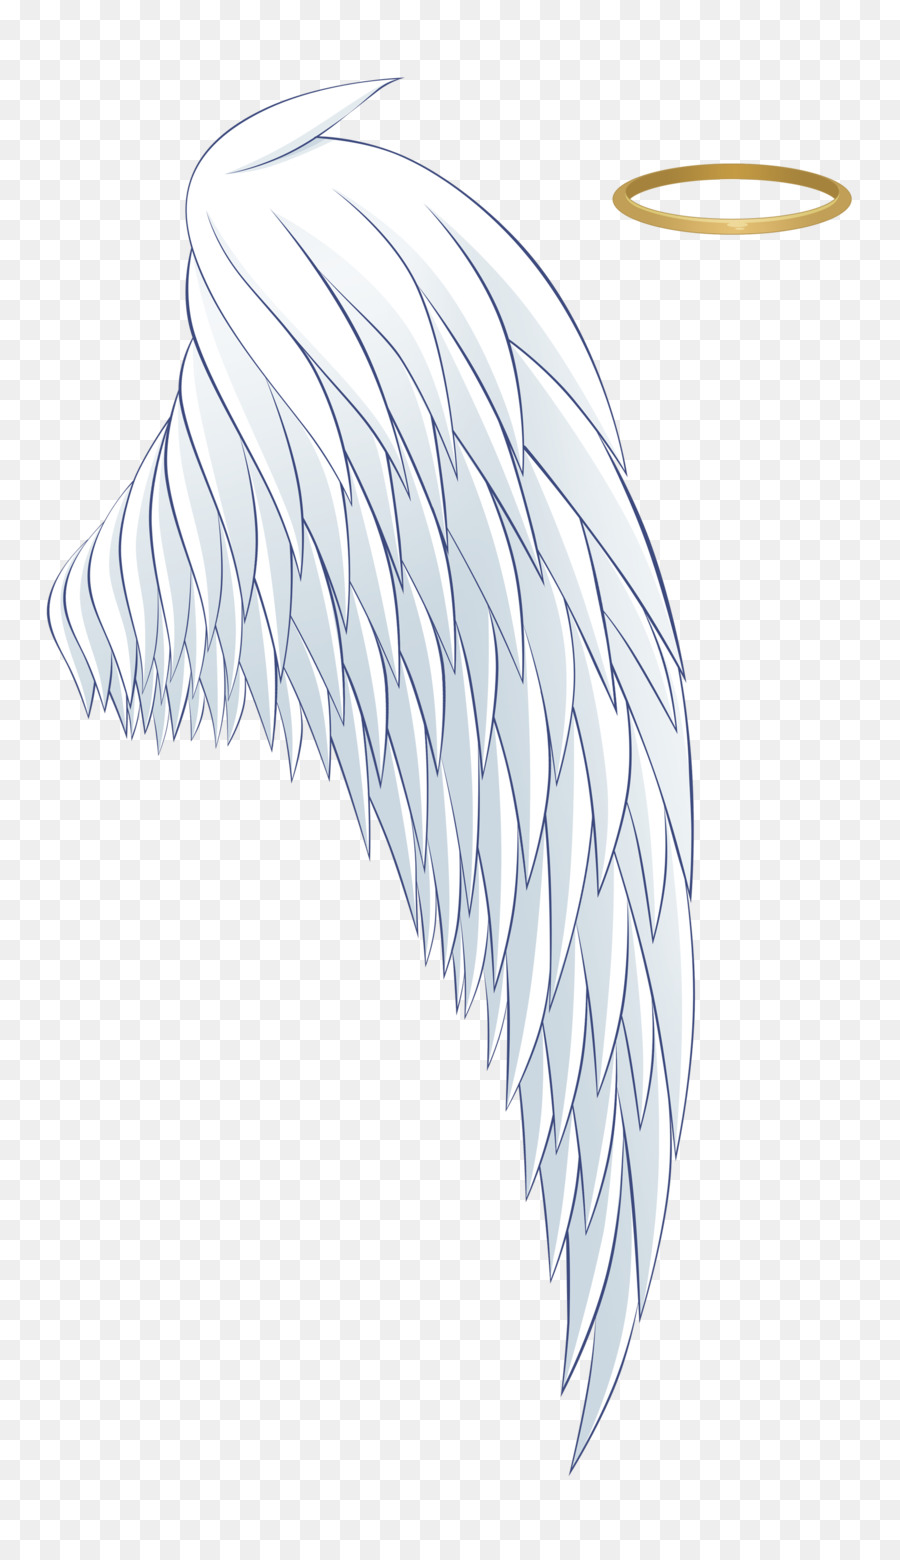 Angel Aureola Wing Icon - White angel wings and a halo png download - 1684*2900 - Free Transparent Angel png Download.